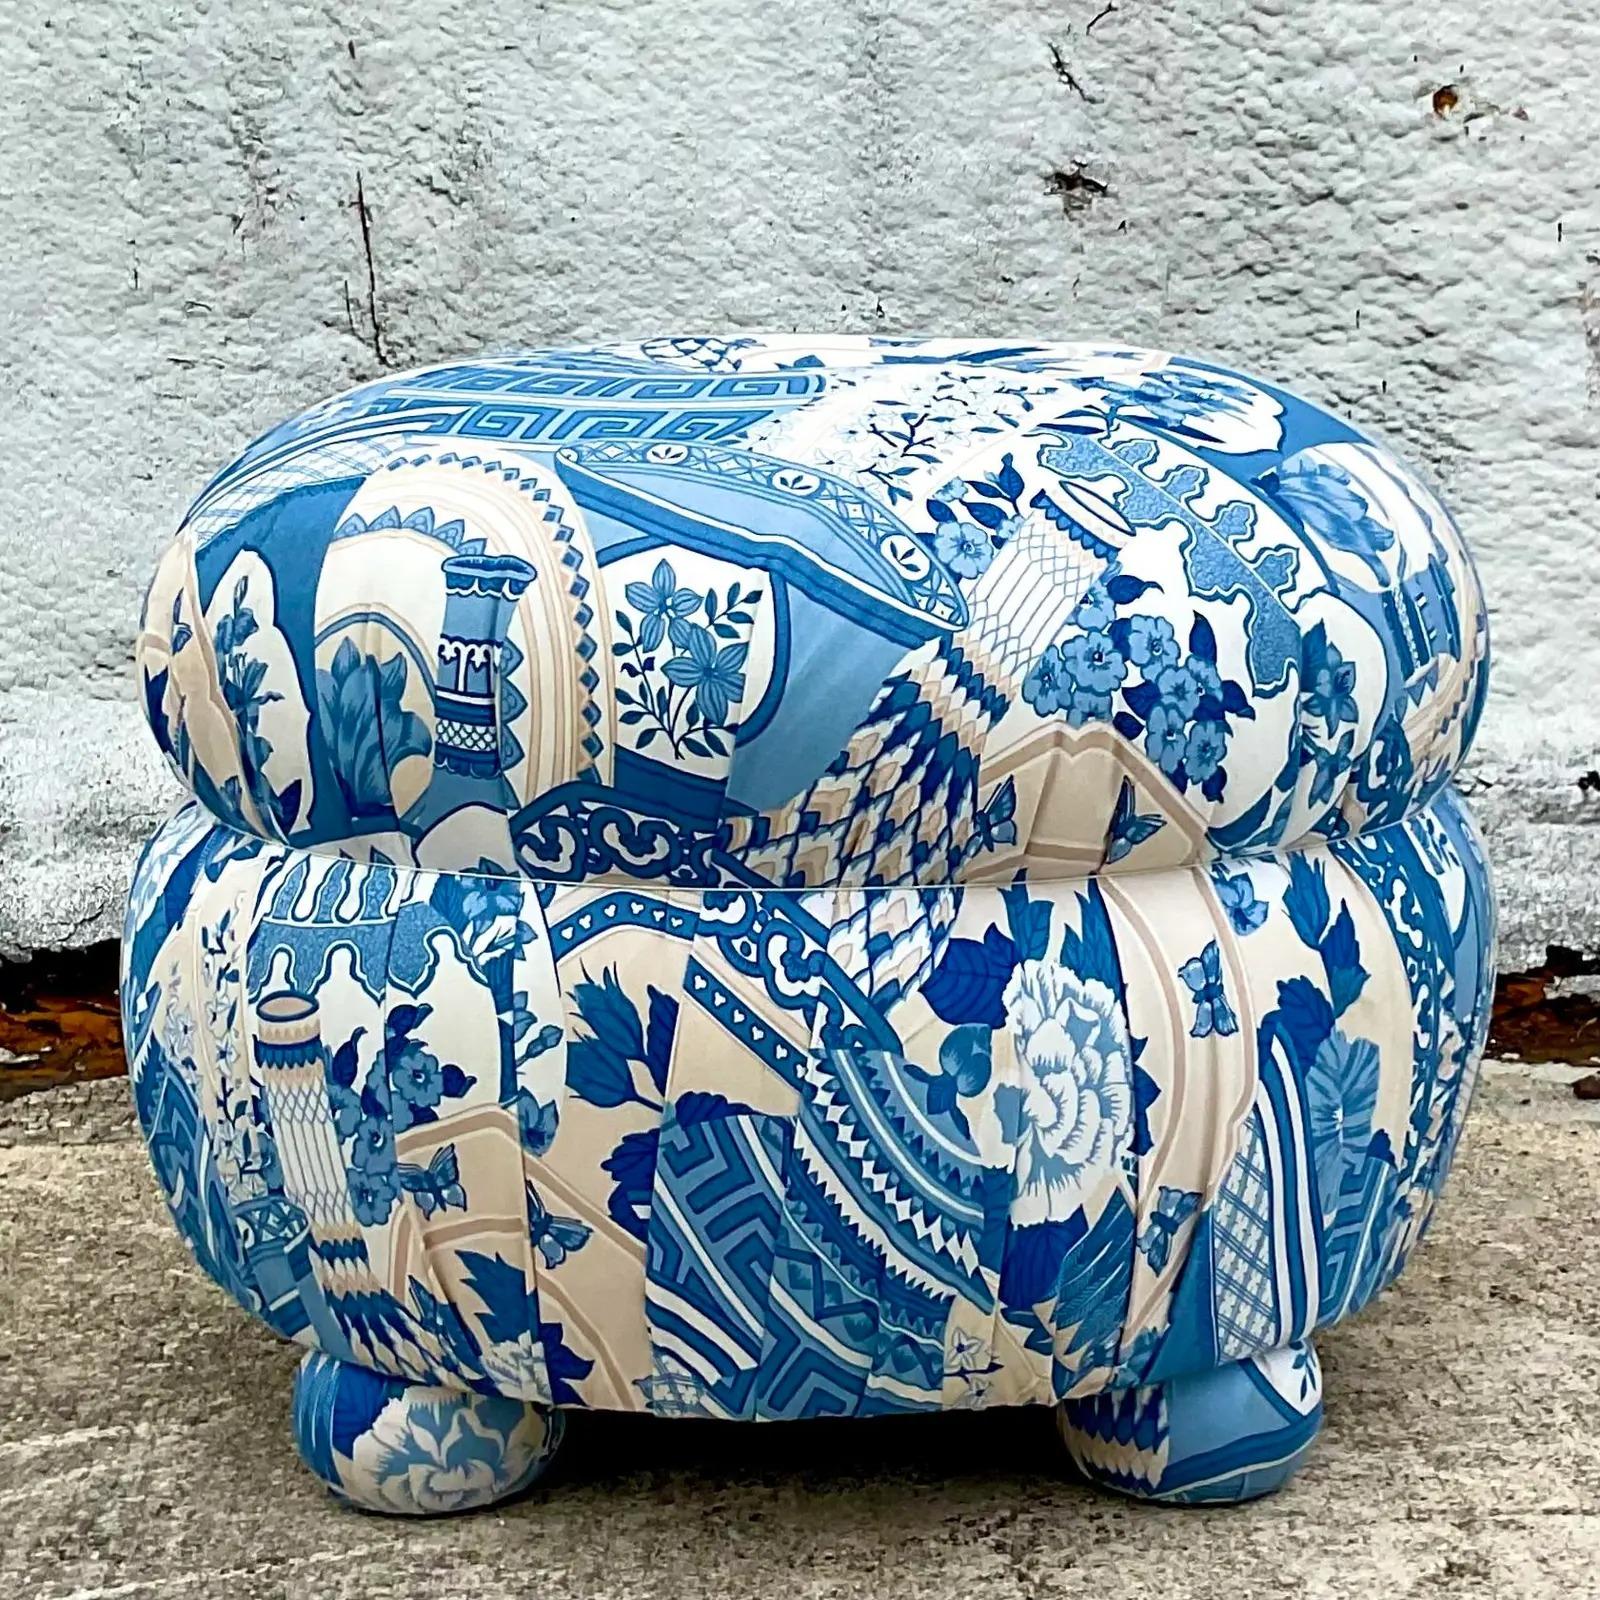 Fabric Vintage Regency Blue and White Ginger Jar Print Tufted Ottoman